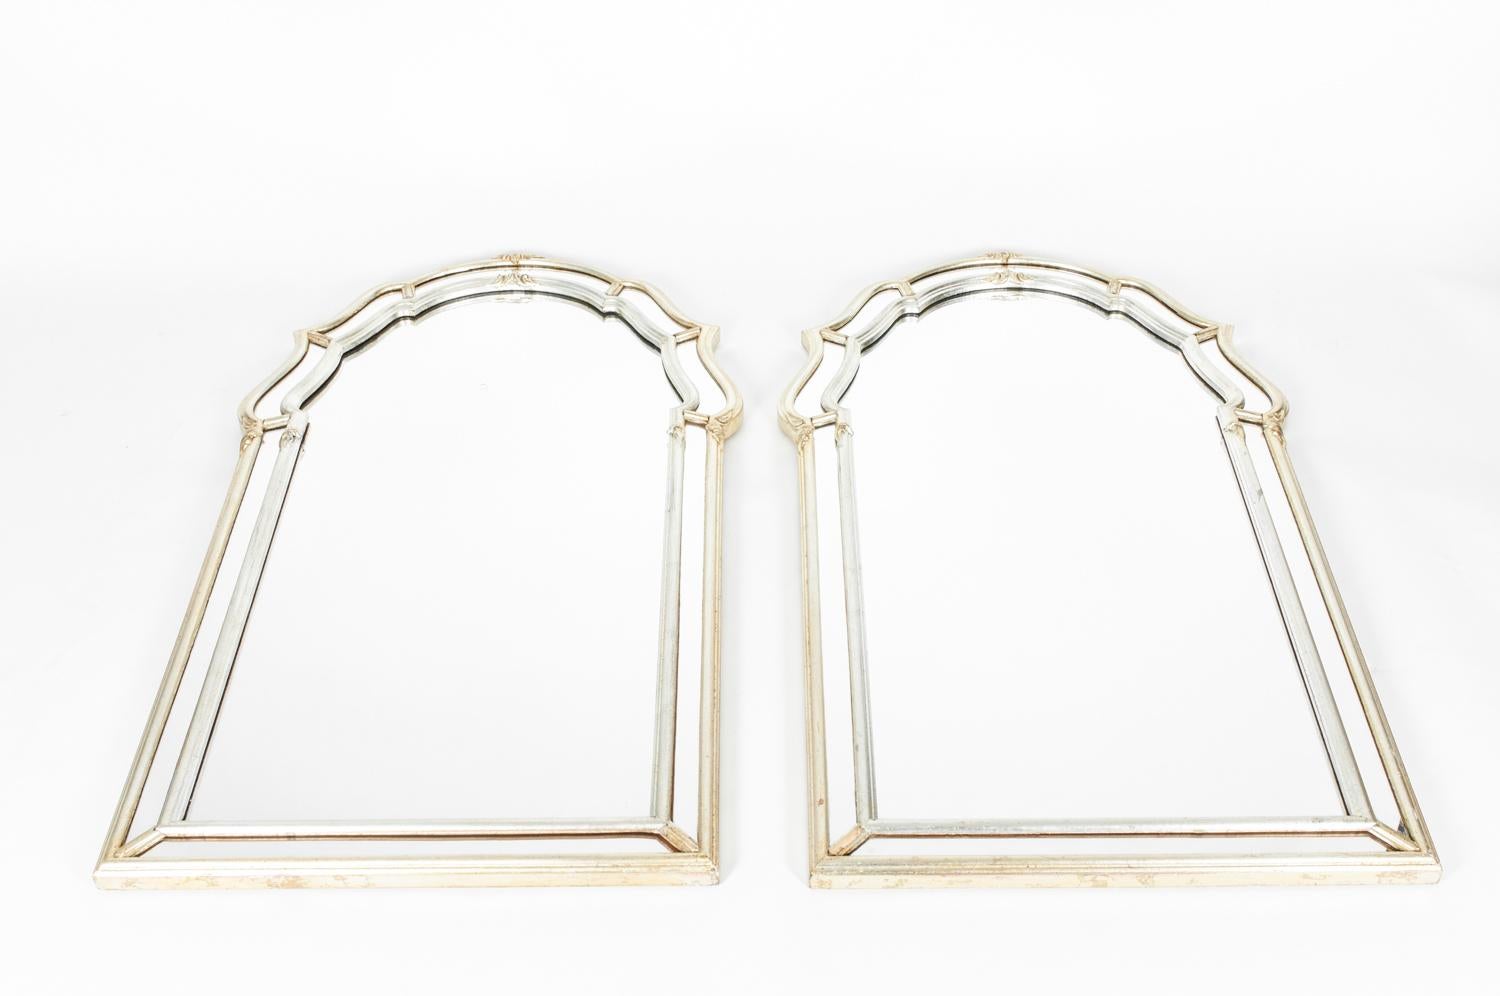 Vintage pair two-tone silvered / gold wood framed Italian hanging wall mirror. Each mirror is in excellent condition. Each mirror measure about 43 inches length x 24 inches width.